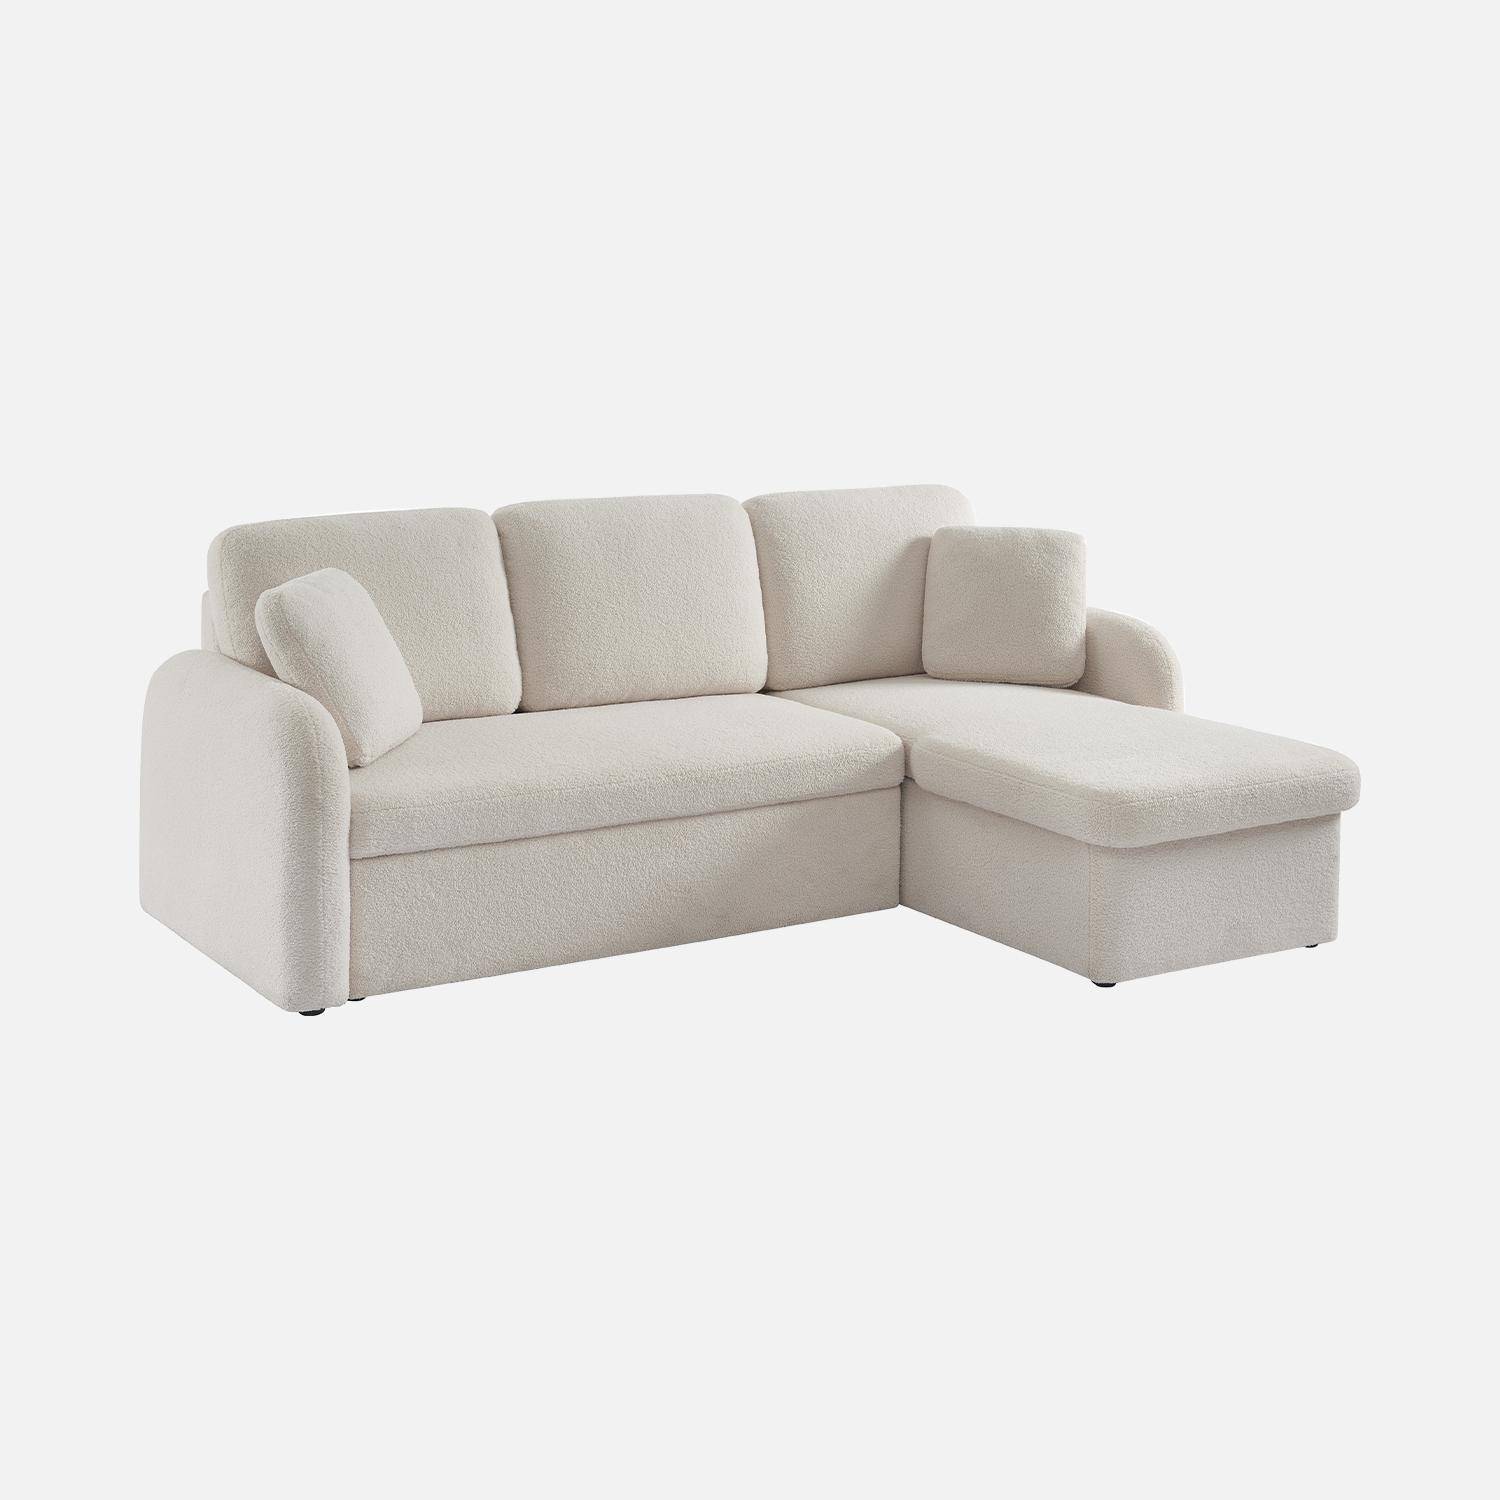 3-seater reversible corner sofa bed with storage box - Milano, Ecru, boucle fabric, rounded lines,sweeek,Photo4